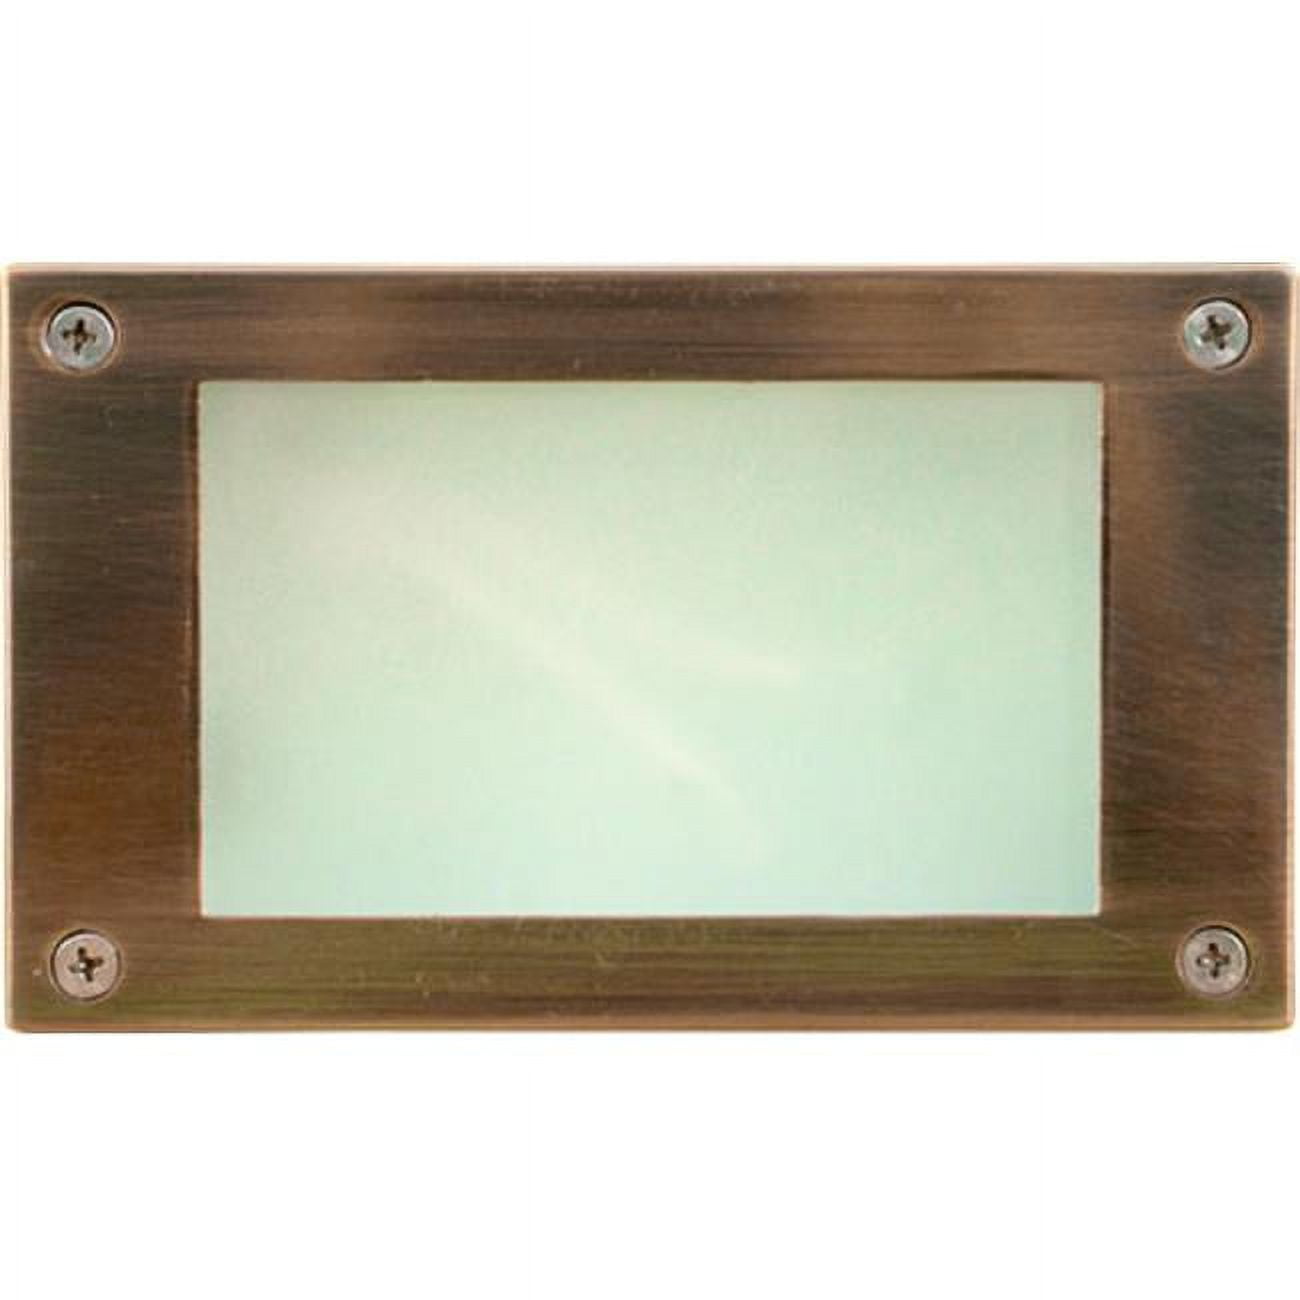 Picture of Dabmar Lighting LV650-ACP Cast Aluminum Recessed Open Face Brick, Step & Wall Light, Electro-Plated Antique Copper - 3.88 x 6.44 x 2.63 in.